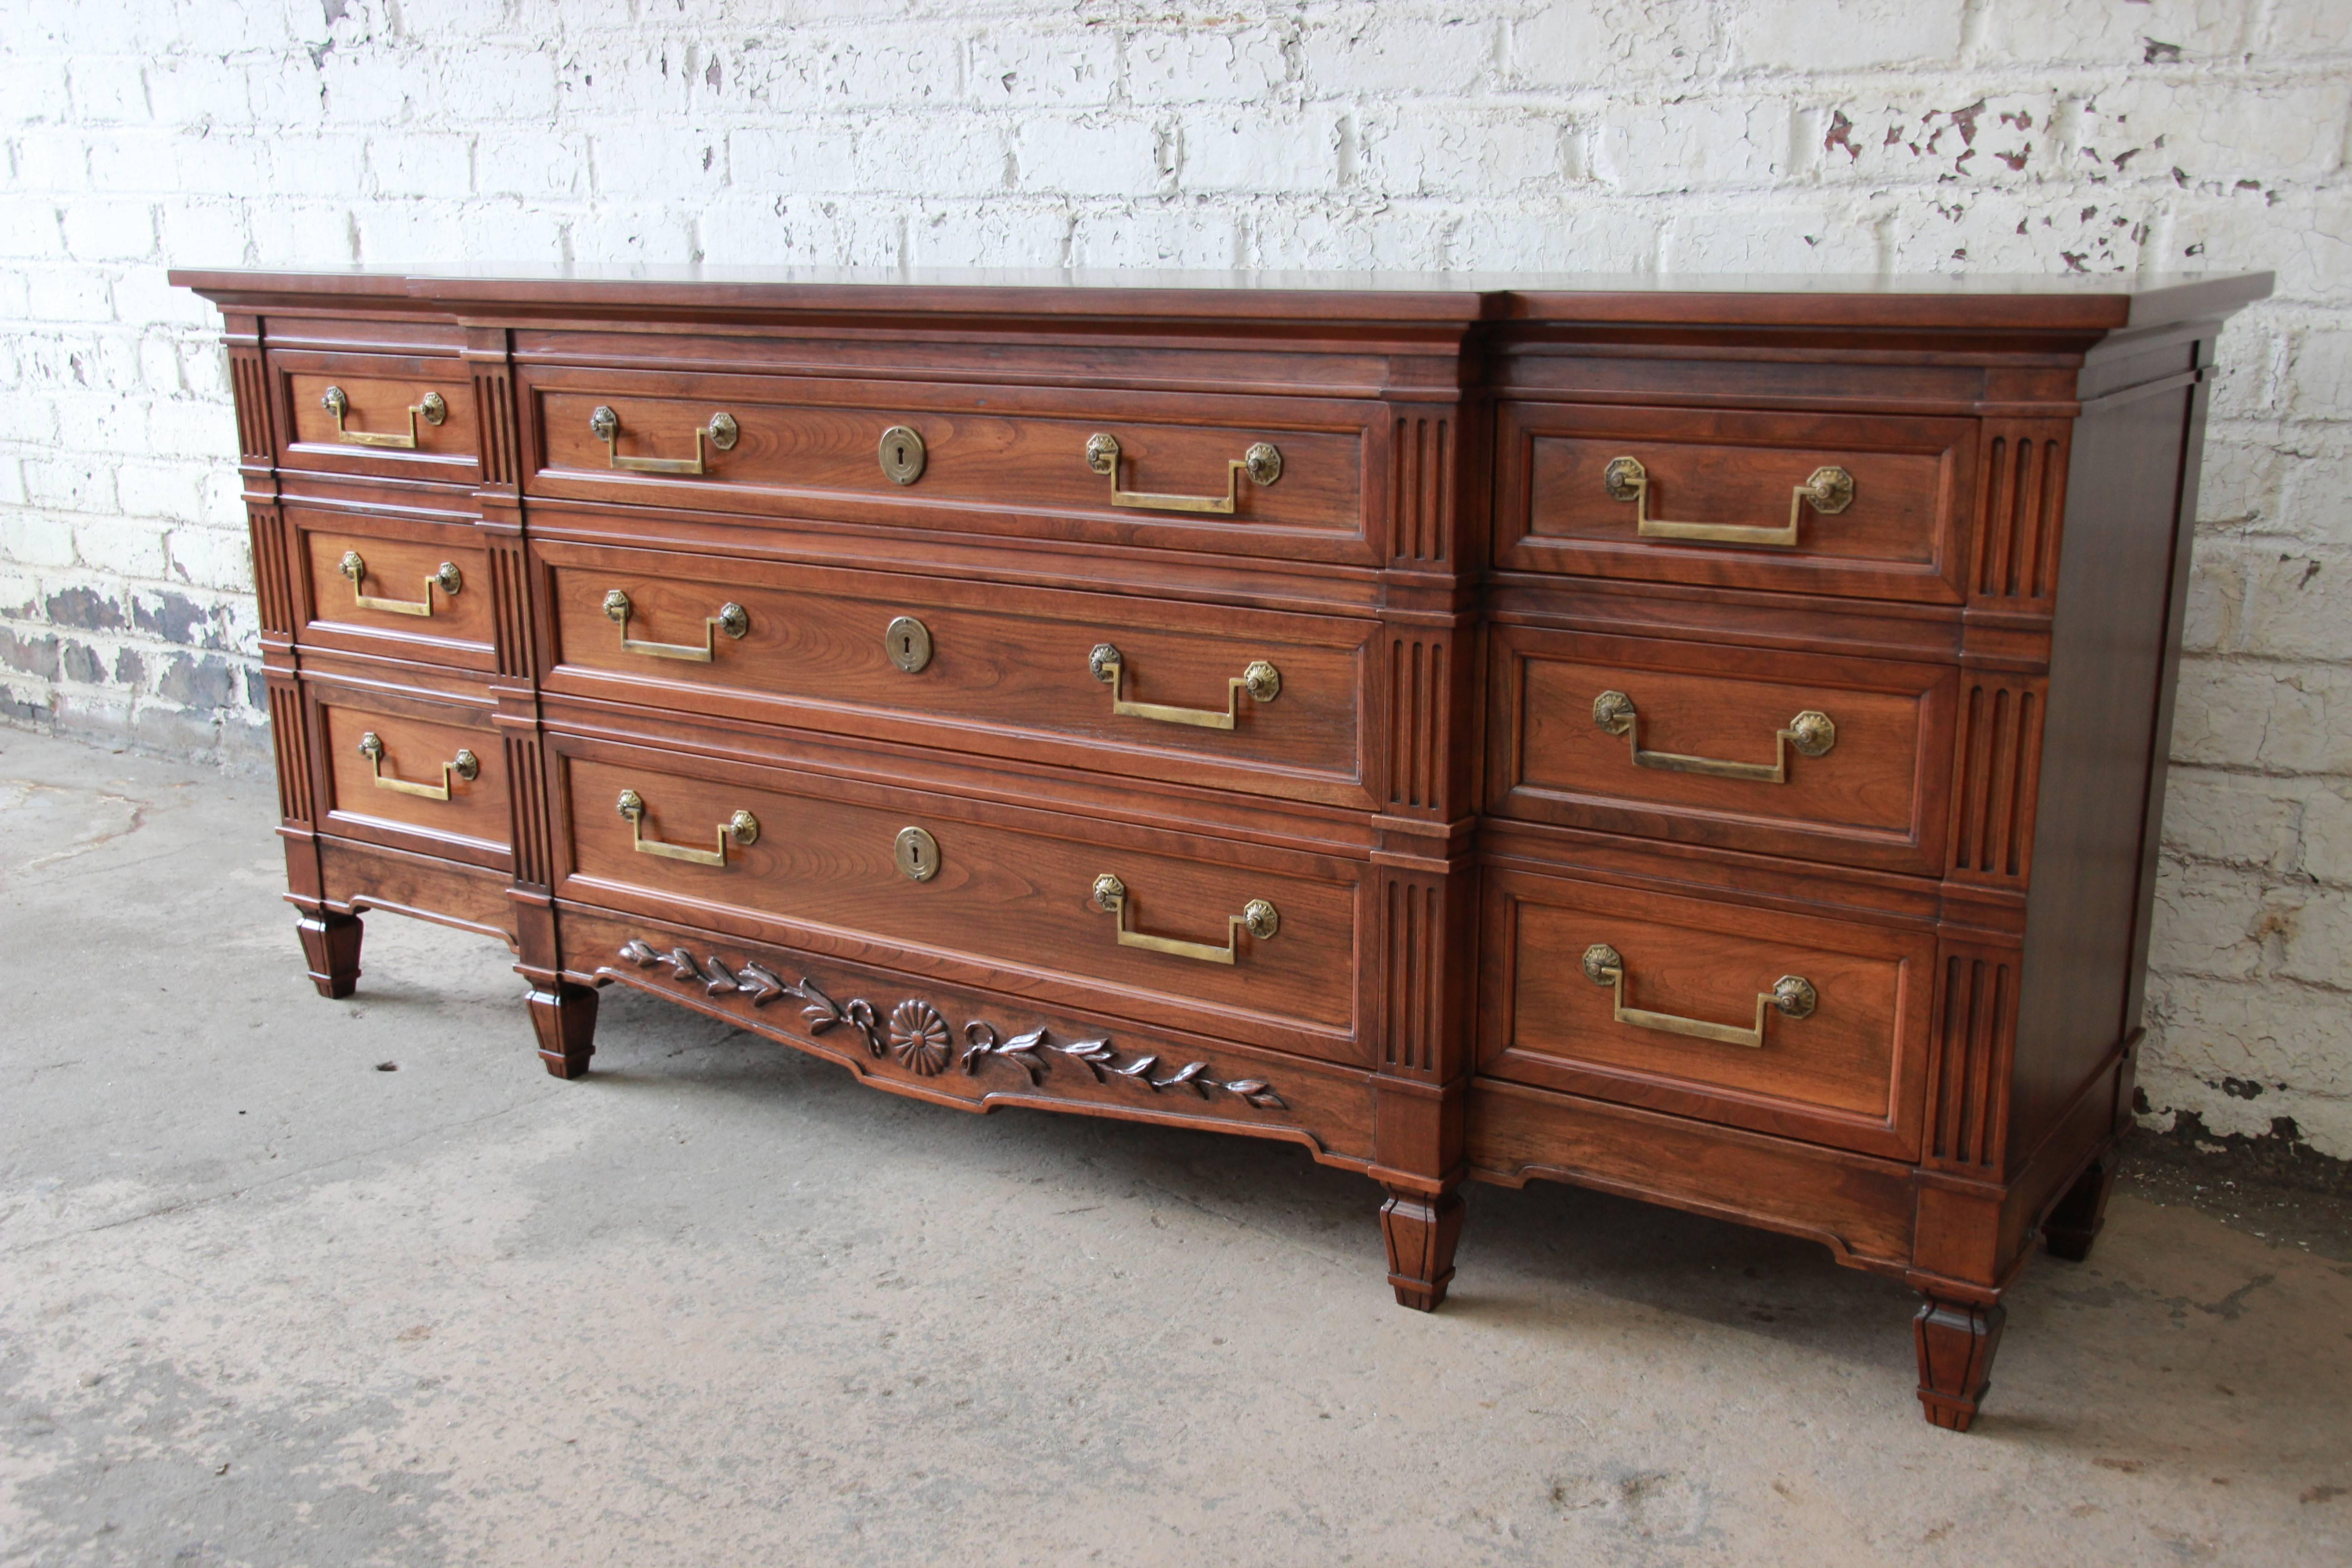 An outstanding vintage French Regency style solid cherrywood triple dresser or credenza by Baker Furniture. The dresser features gorgeous cherrywood grain with beautiful carved wood details. It offers ample room for storage, with nine dovetailed